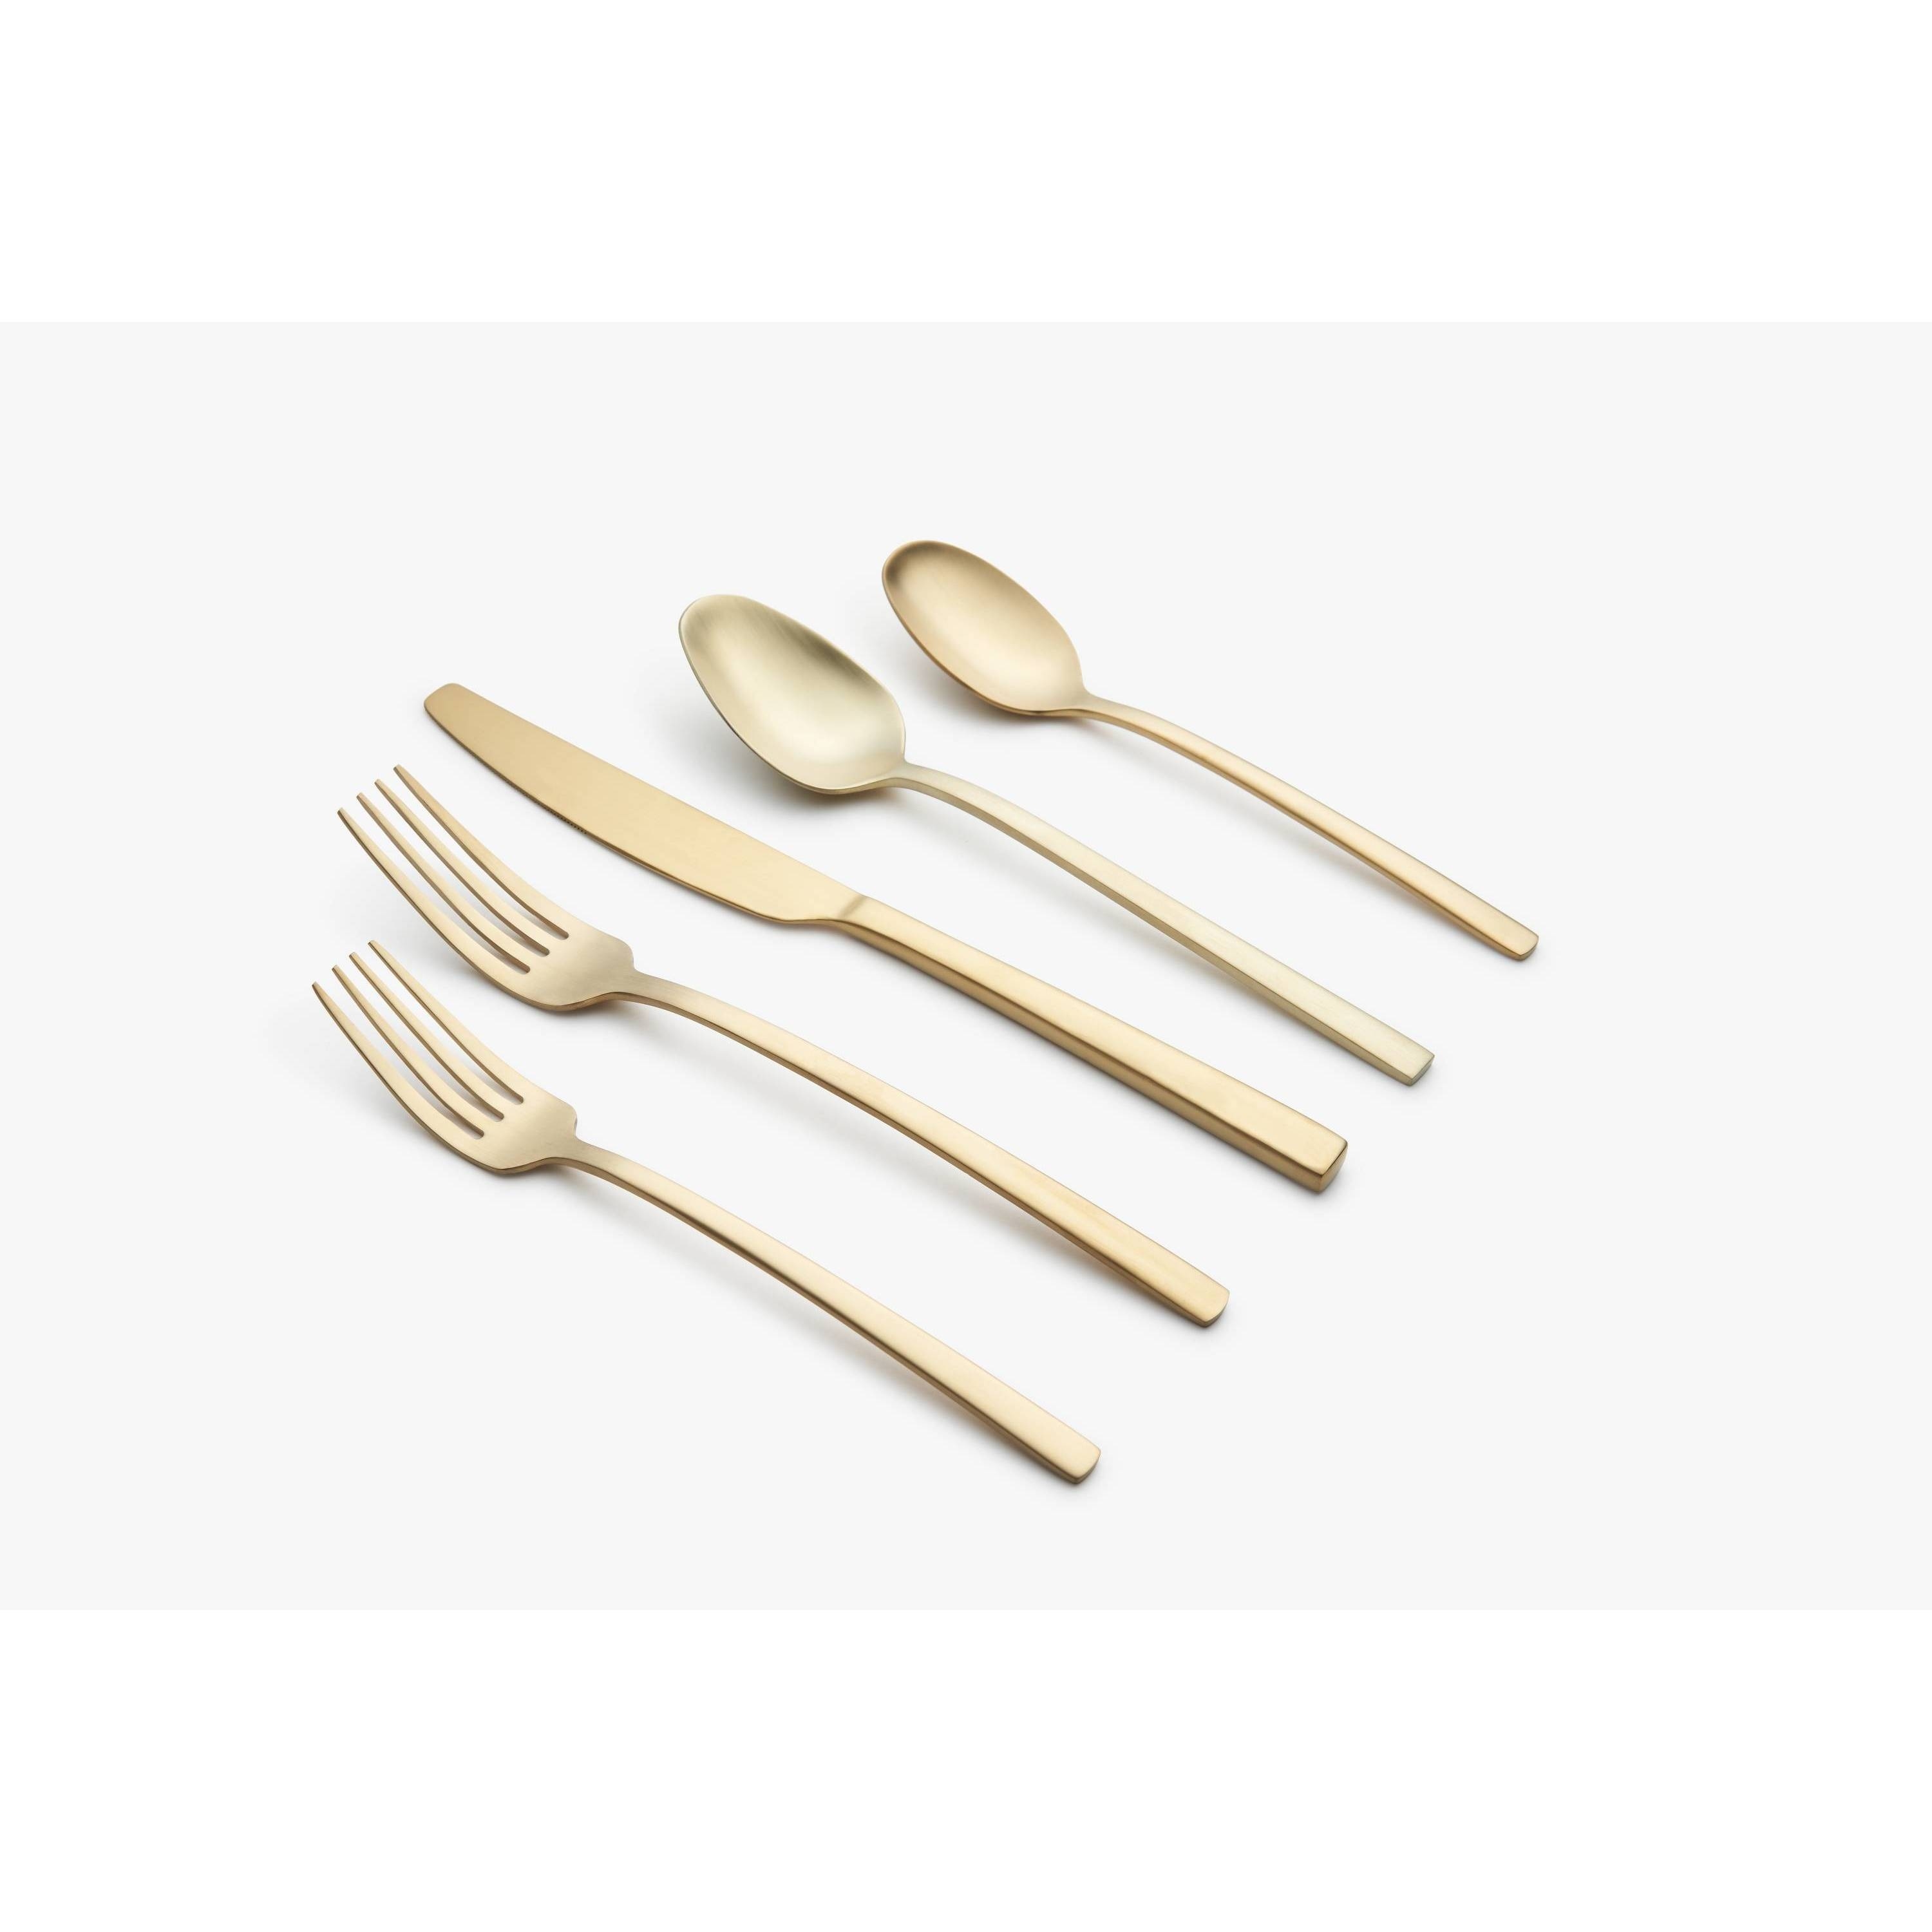 https://ak1.ostkcdn.com/images/products/is/images/direct/256bc06dcc9f12804f7968cd8463789a243e06a6/Beacon-Gold-Satin-45-Piece-Flatware-Set.jpg